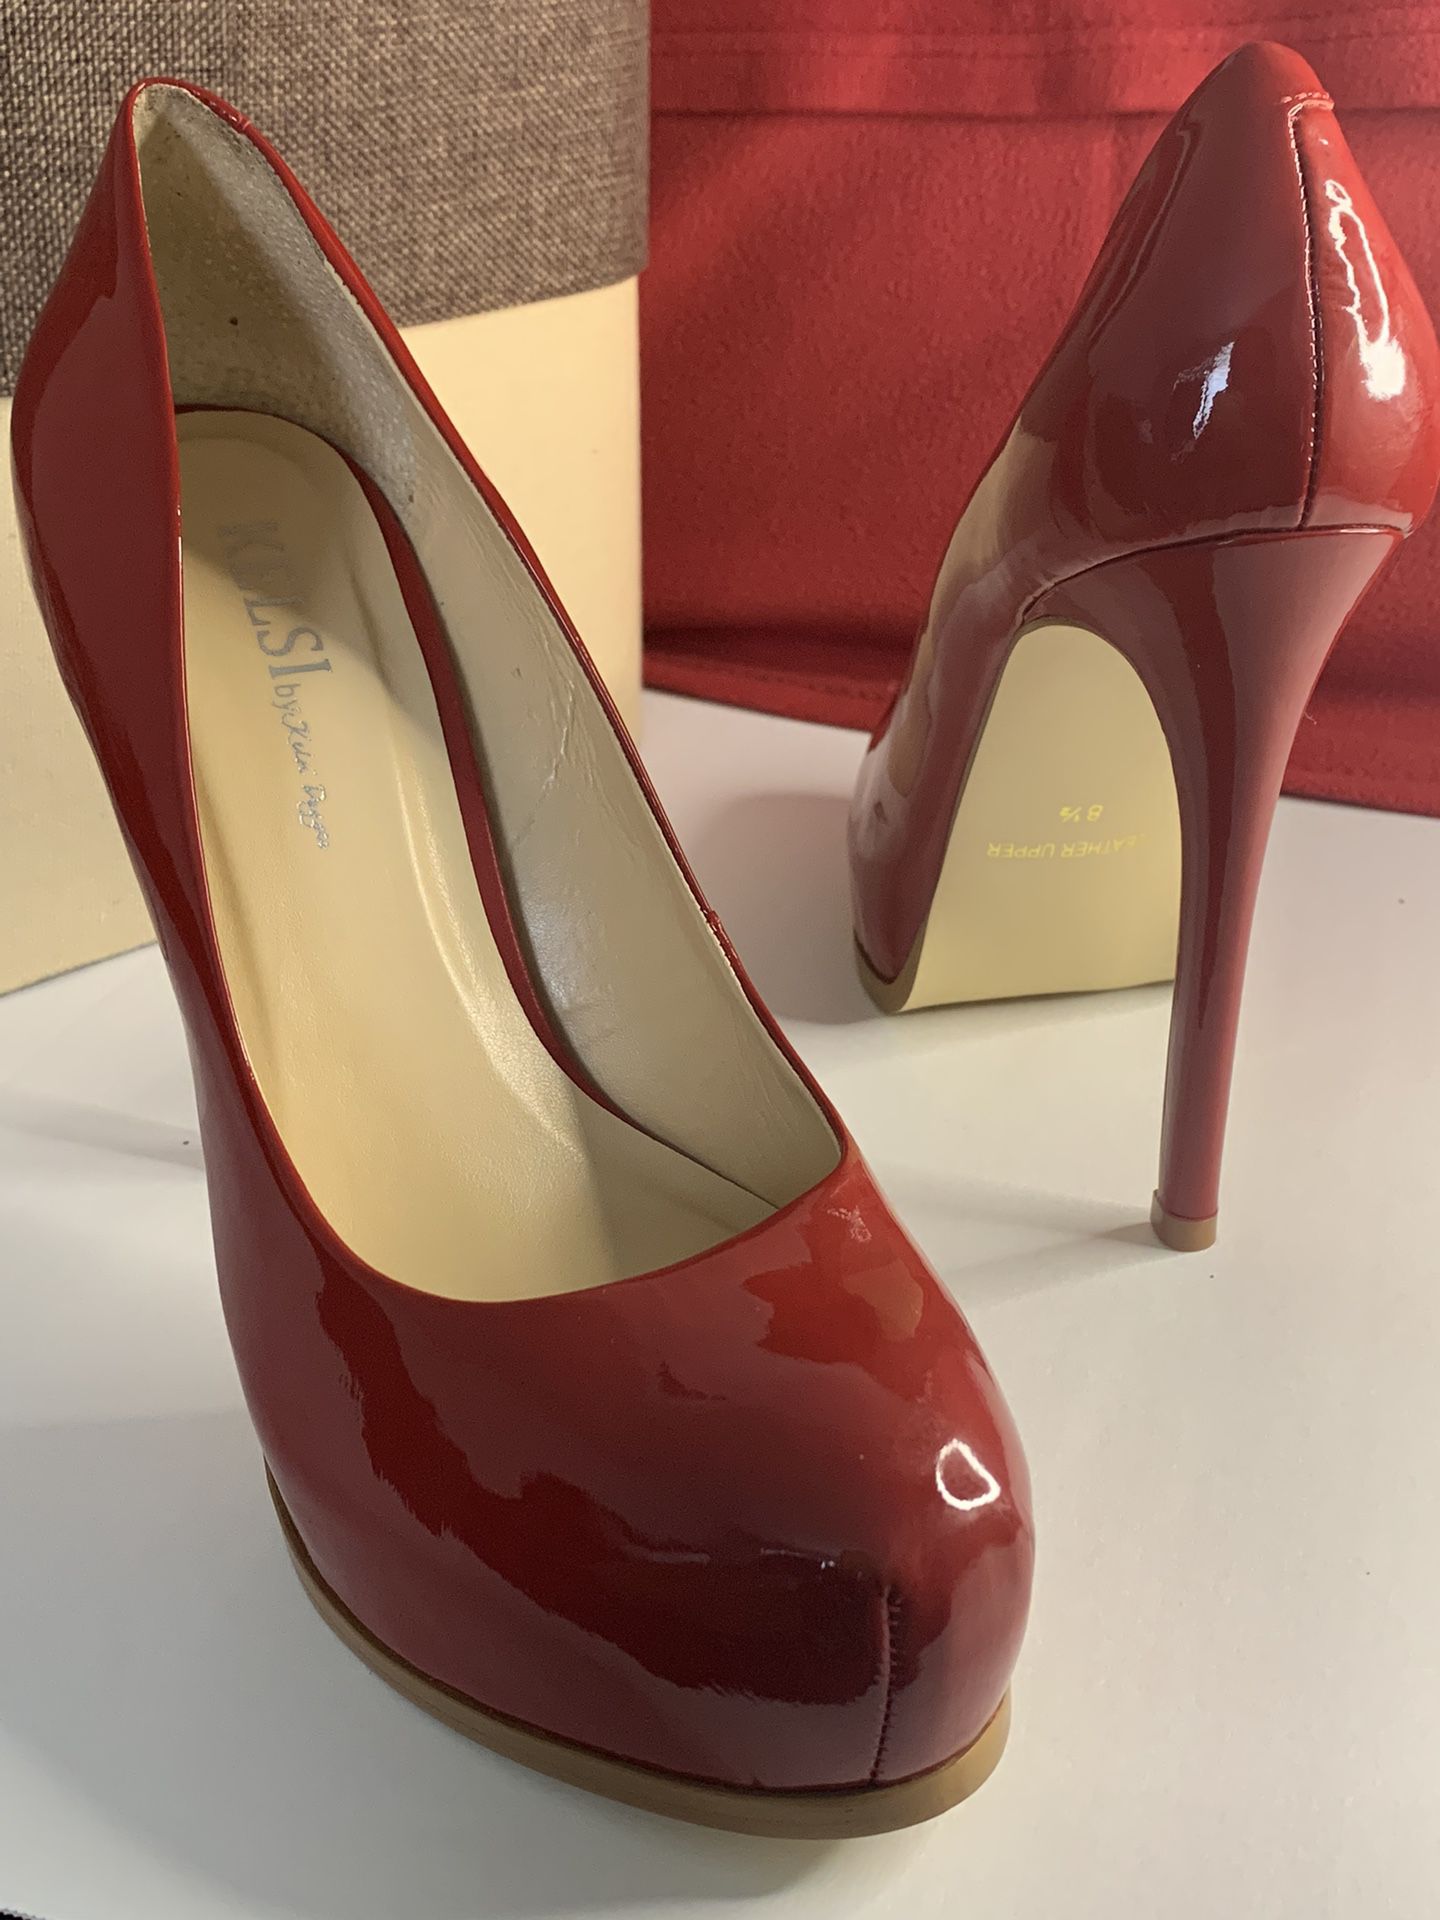 Final Sale - Size 8.5 Cherry Red Patent Leather Platform 5in Heels